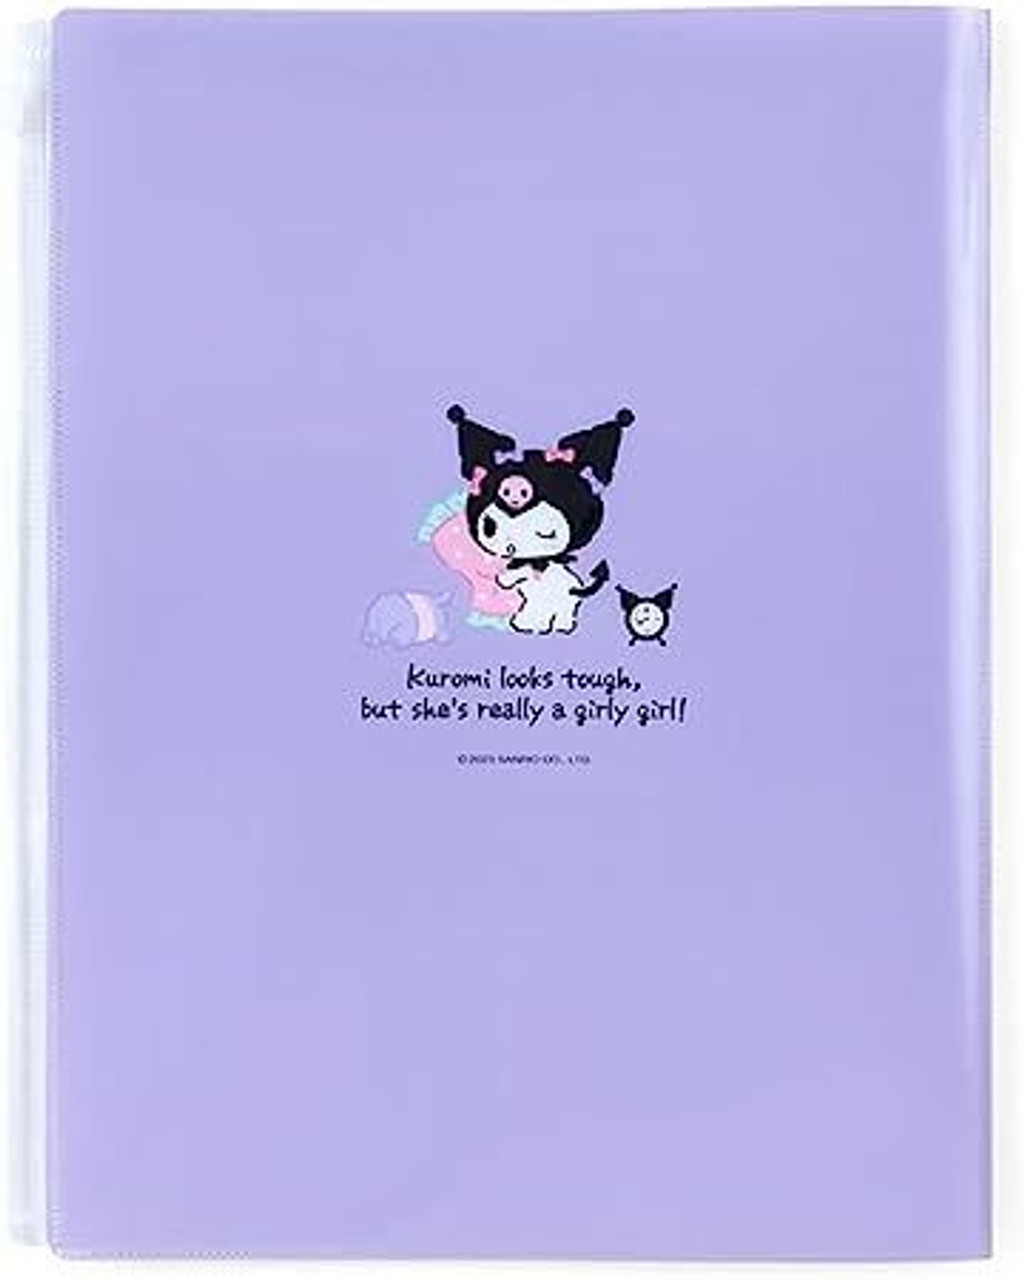 Hello Kitty Plastic Folder with Pockets and Zipper, Clear File, A4 Size, Sanrio  Stationery